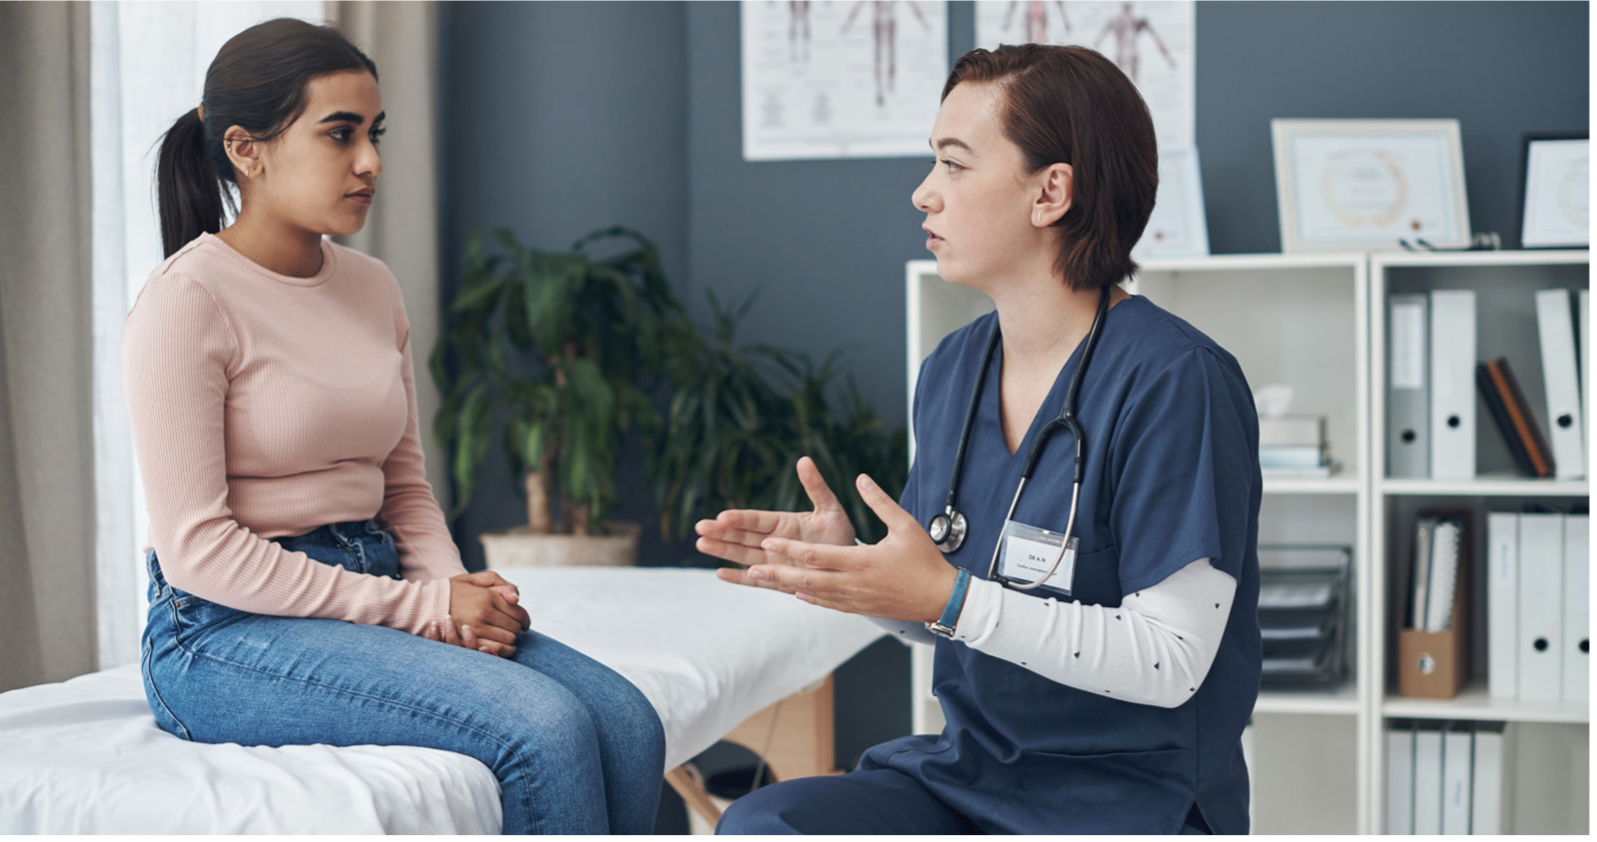 This is what you need to do. a young female doctor talking to a patient in an office.| Image credit: © - J Bergen/peopleimages.com © - stock.adobe.com.